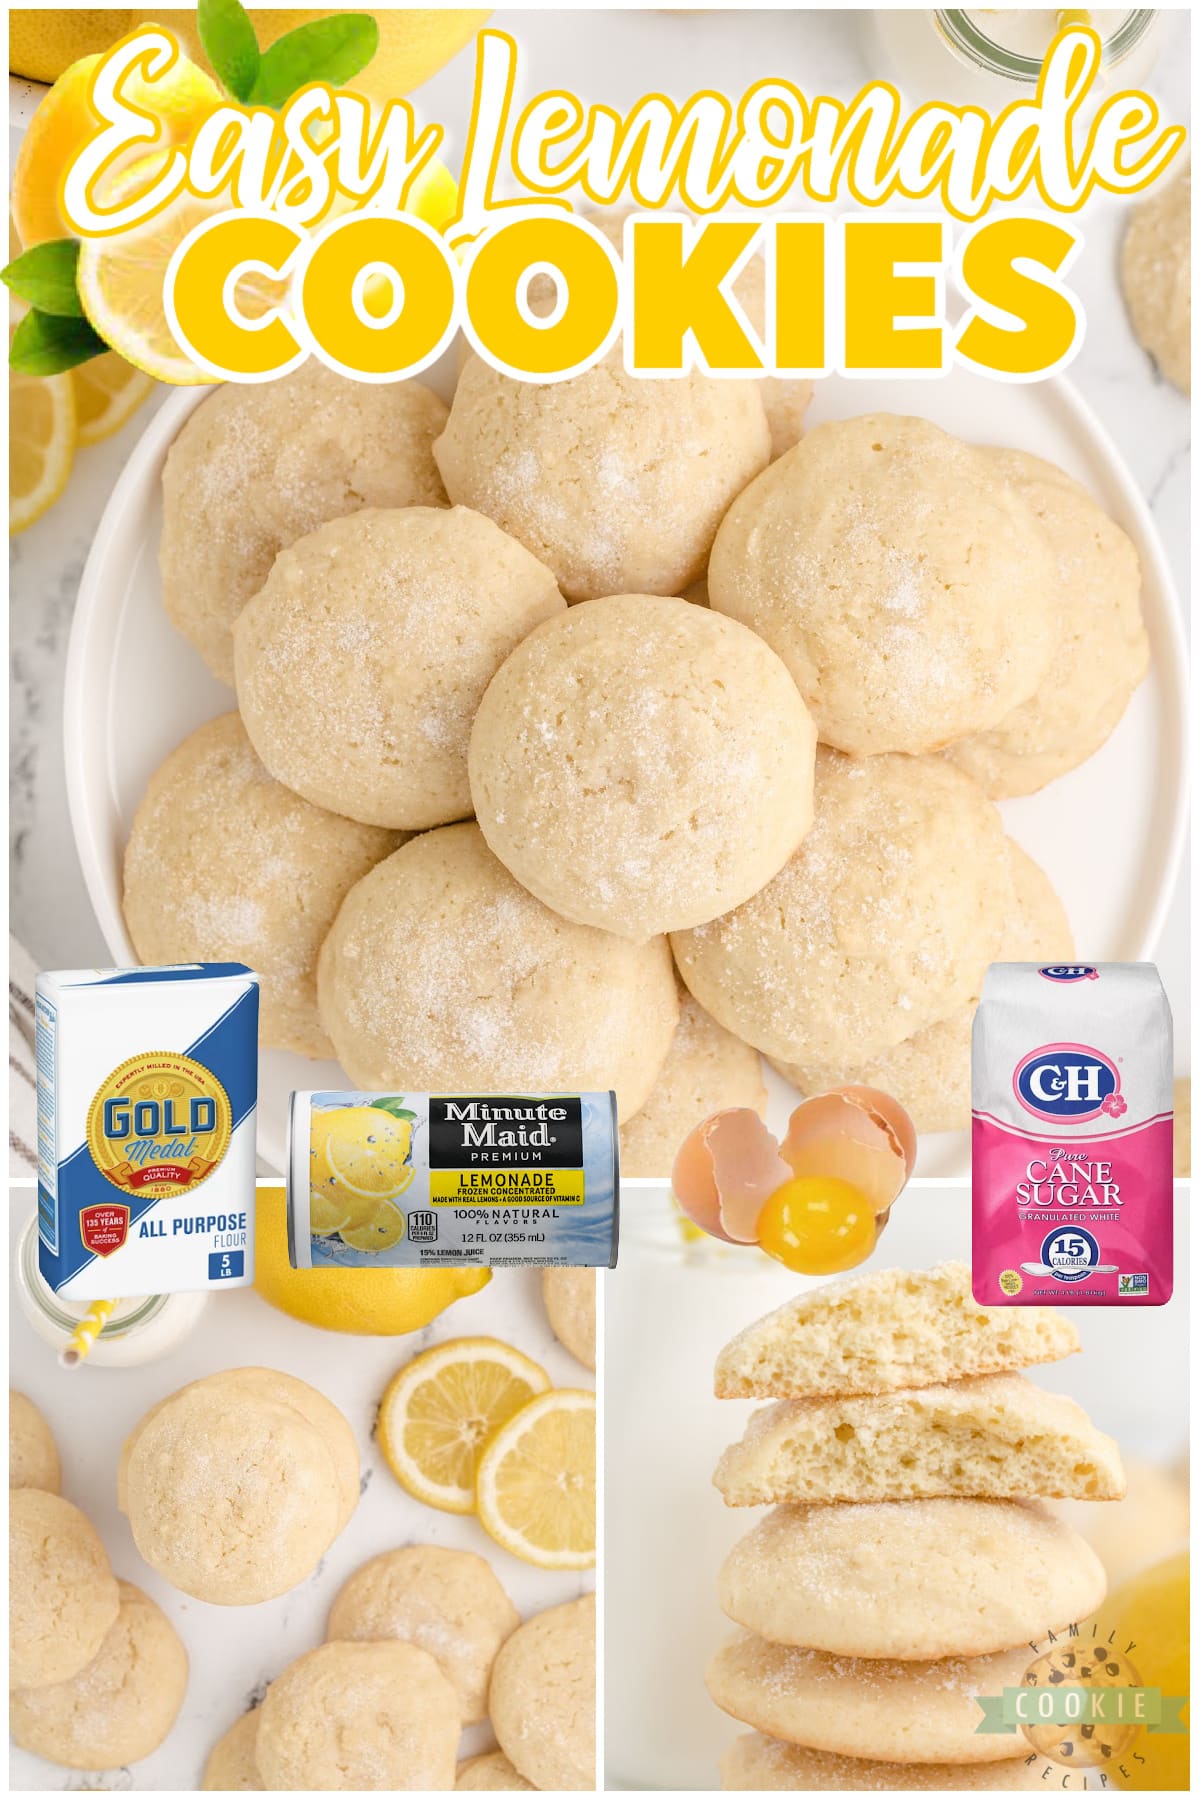 Easy Lemonade Cookies are soft, chewy and packed with lemon! These delicious lemon cookies are made with only 6 ingredients, one of them being lemonade concentrate.